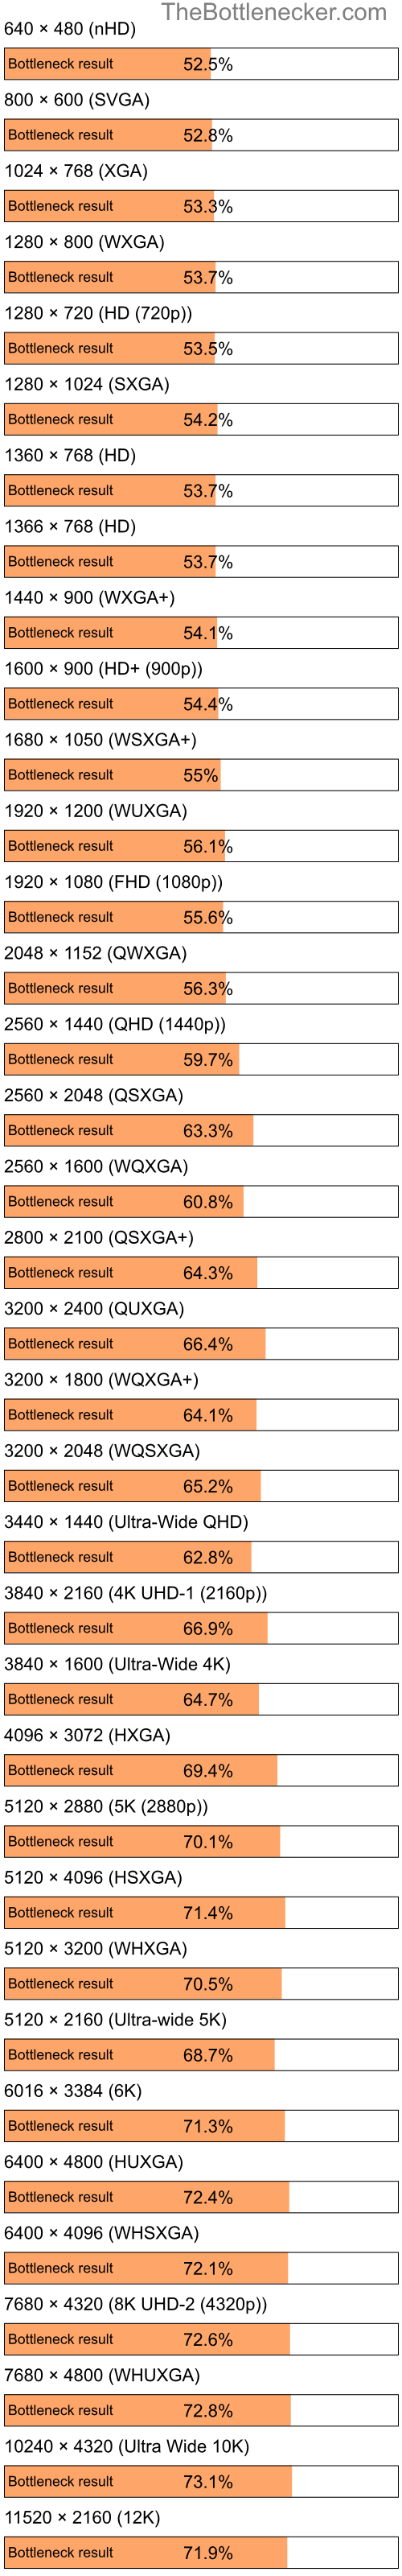 Bottleneck results by resolution for Intel Pentium 4 and AMD Radeon HD 4200 in Processor Intense Tasks